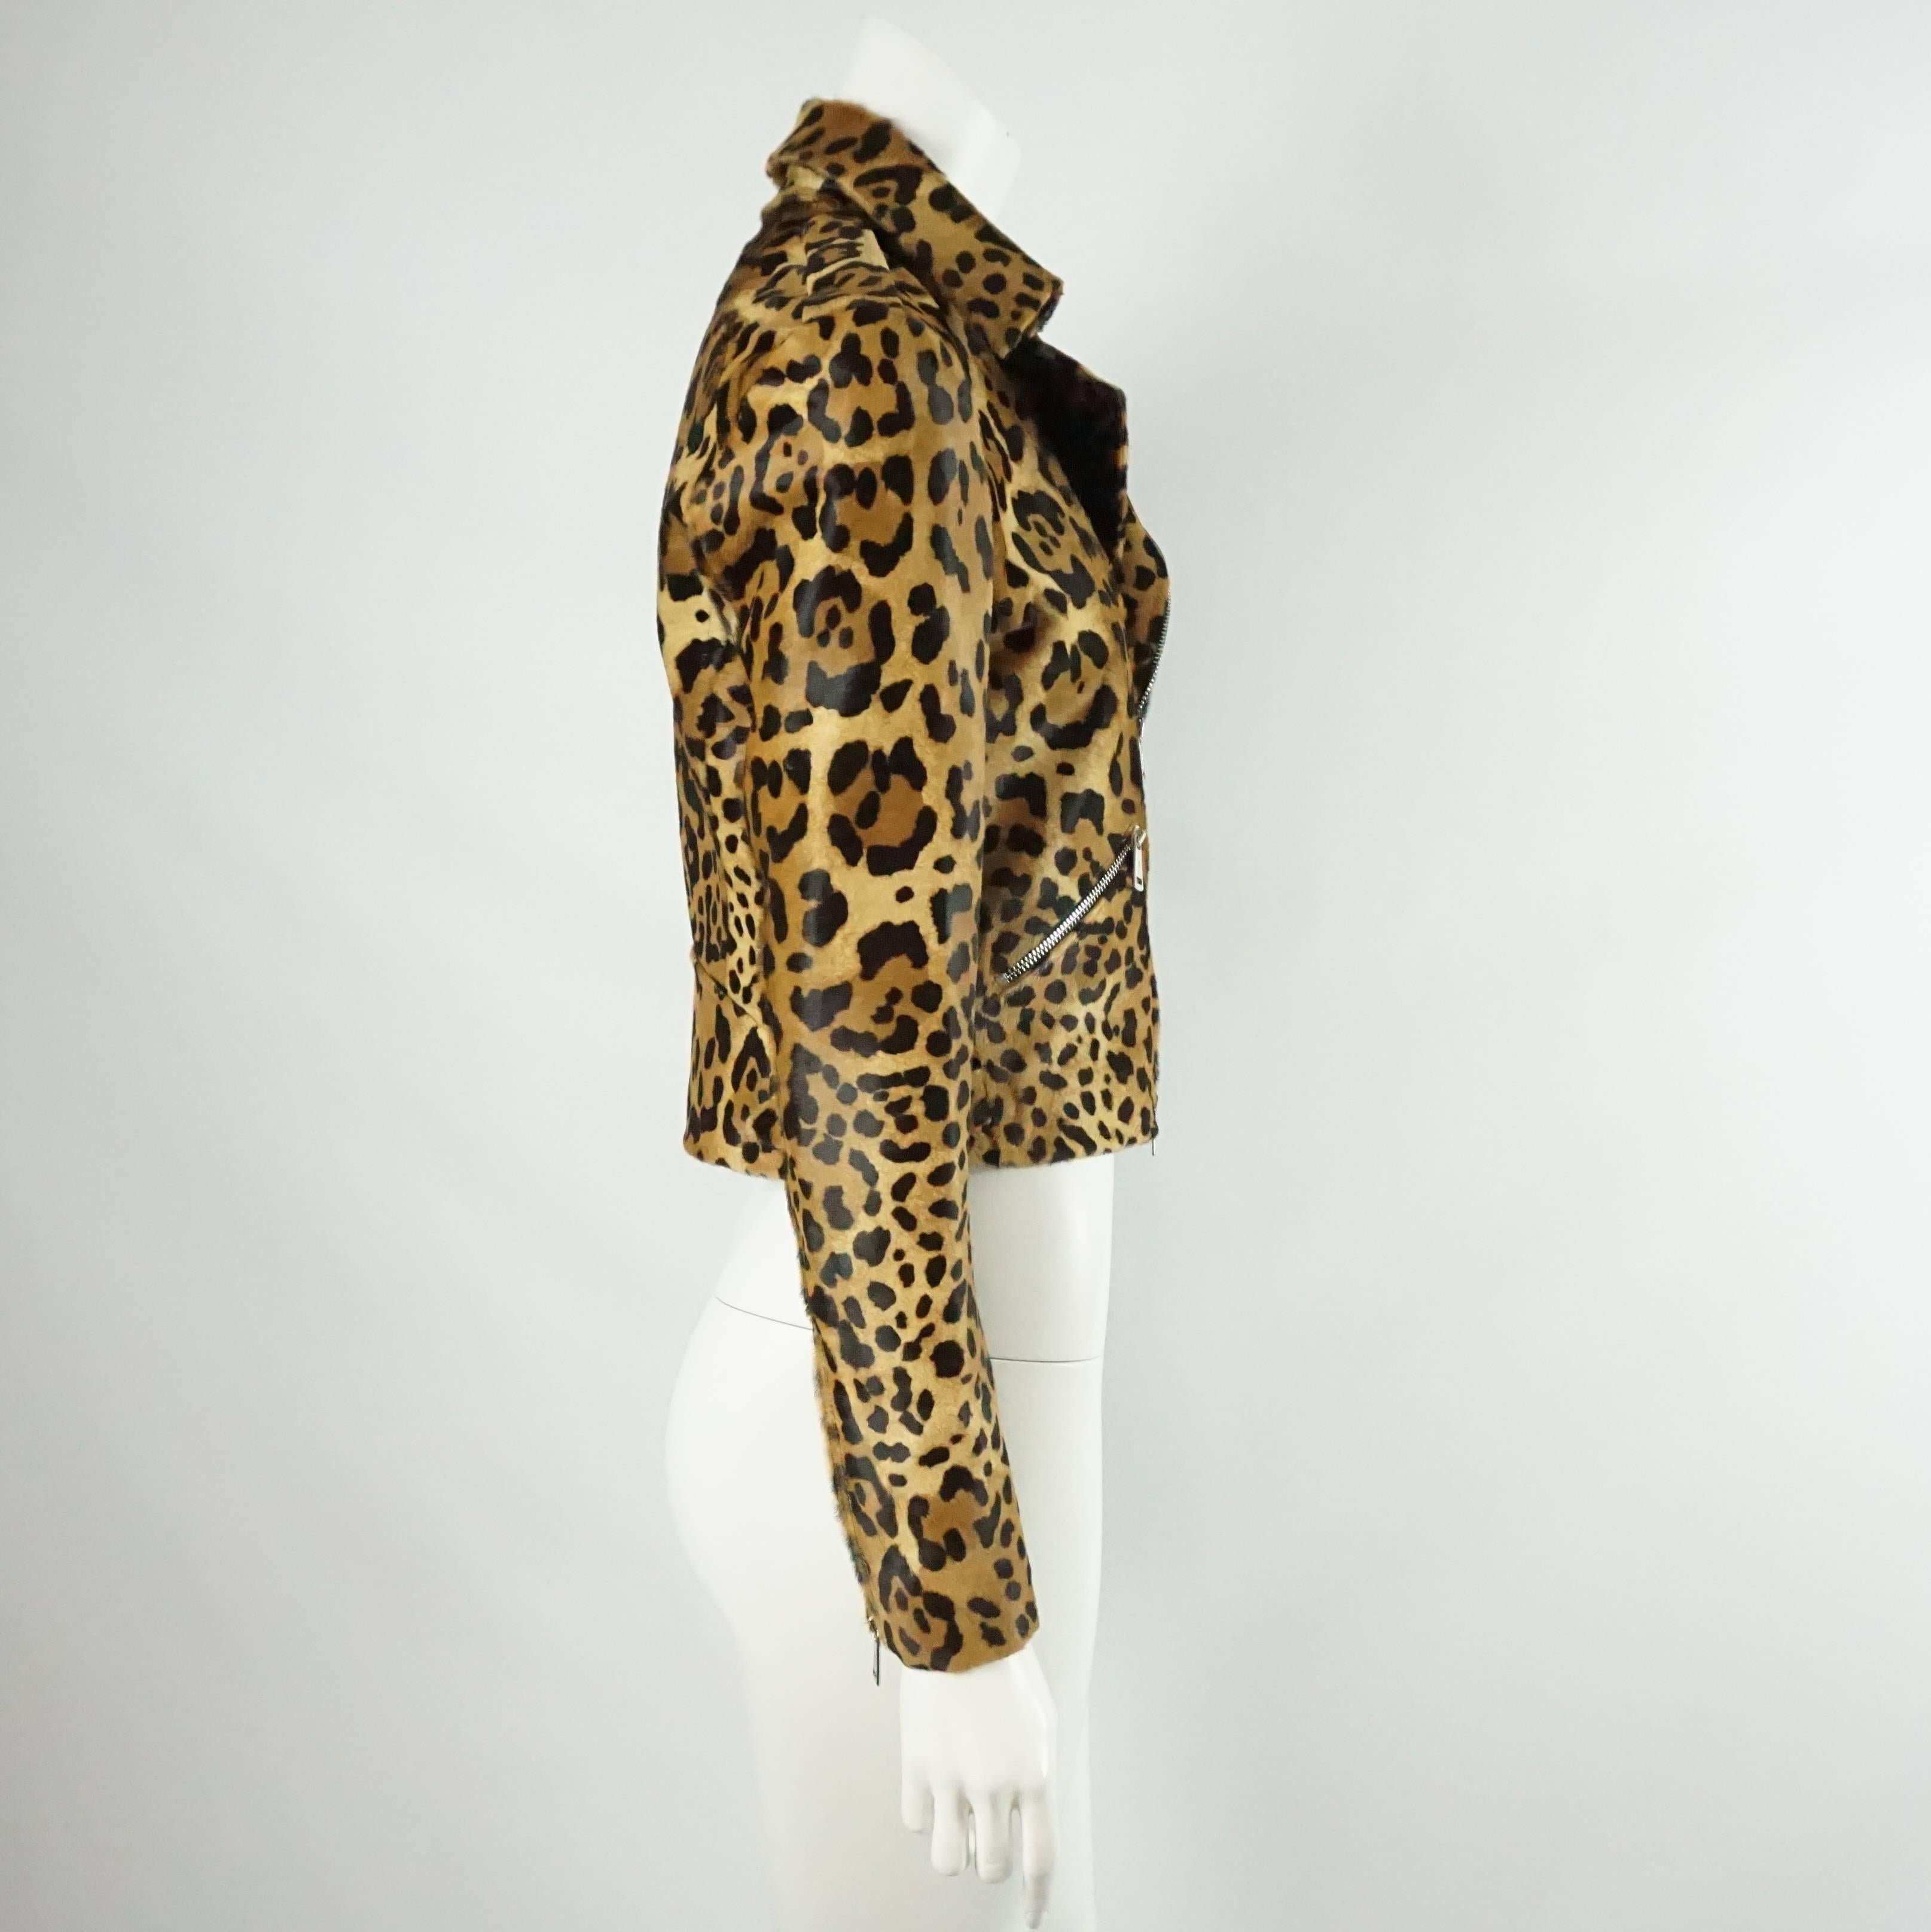 Ralph Lauren Black Label Leopard Print Calf Hair Motorcycle Jacket - 2. This jacket hot for fall with a twist on the typical motorcycle jacket. Its fabric gives it an adventurous flare and the silver zippers add an edgy feel. The piece is in